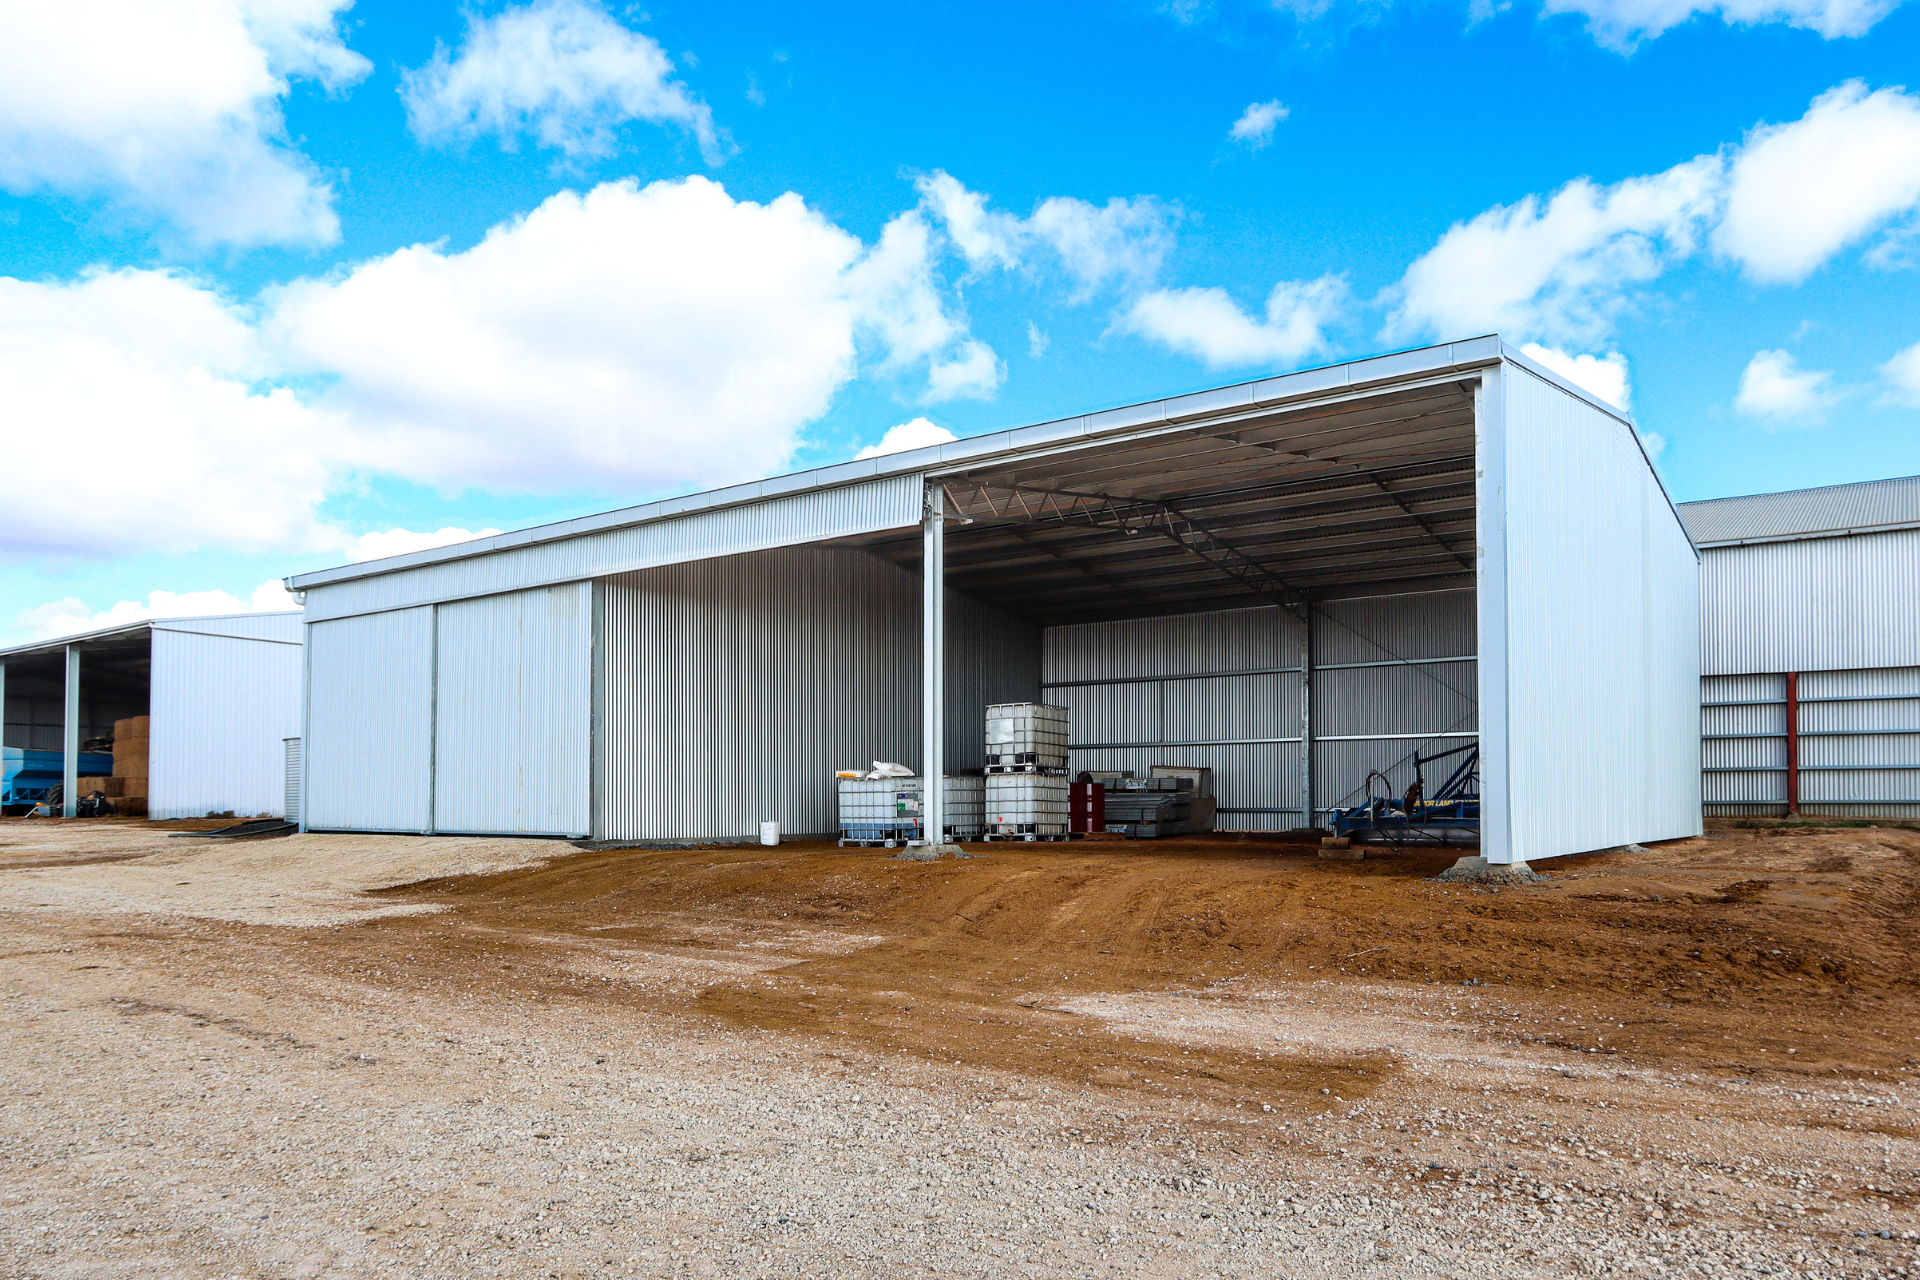 A 21m x 12m x 4.5m chemical shed at Rainbow VIC